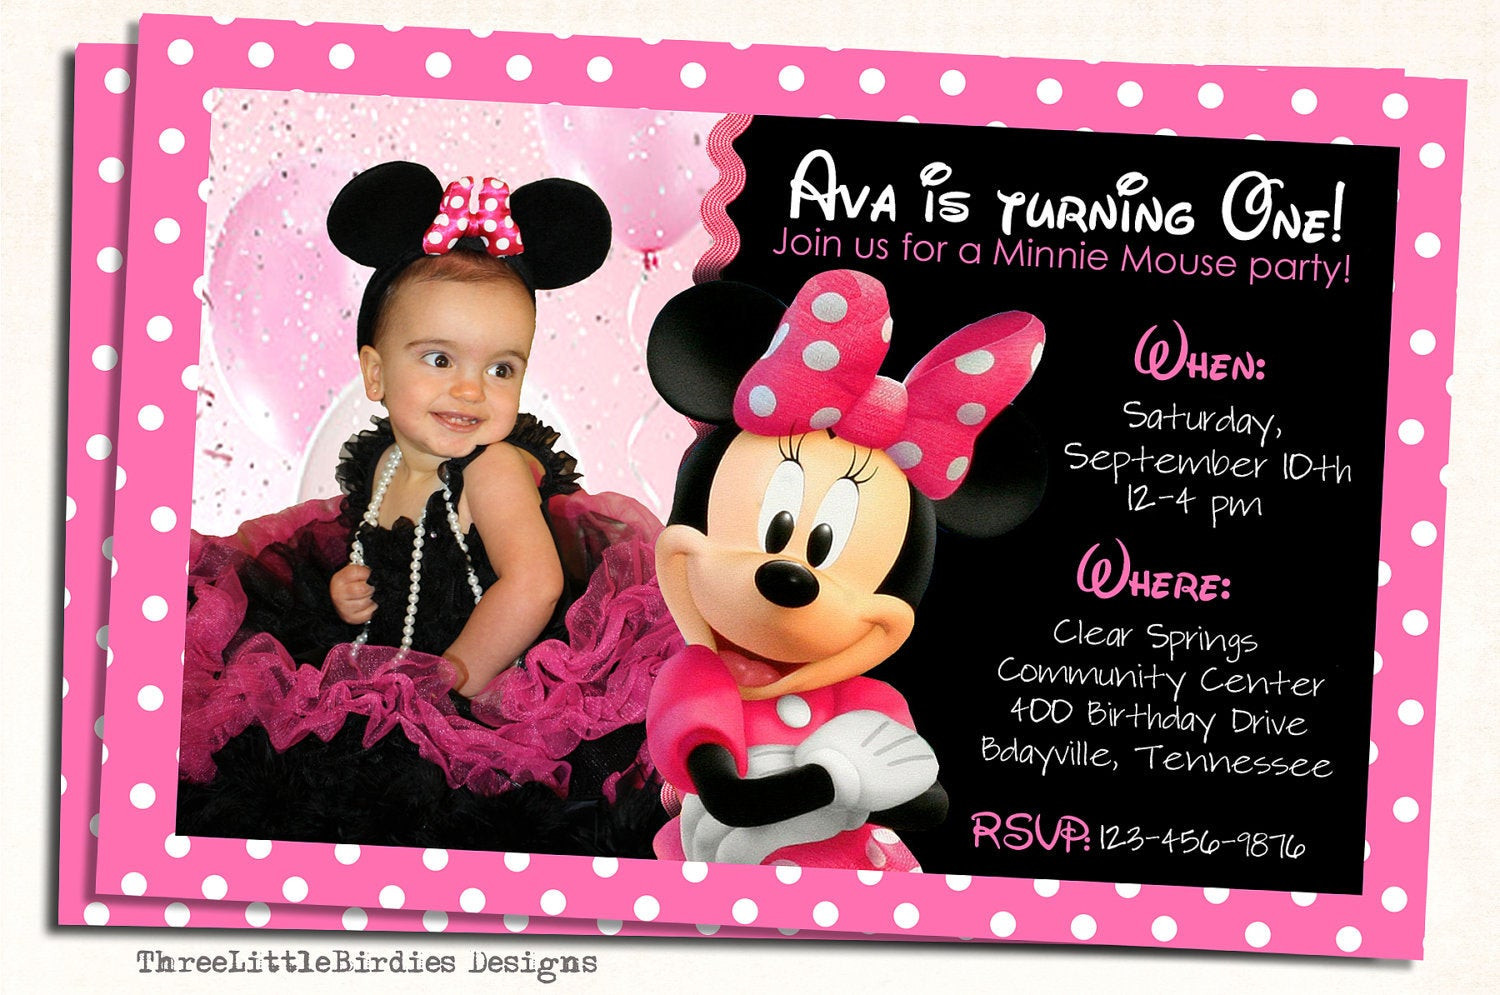 Minnie Mouse Birthday Invitations Personalized
 Minnie Mouse Birthday Invitation by elenasshop on Etsy